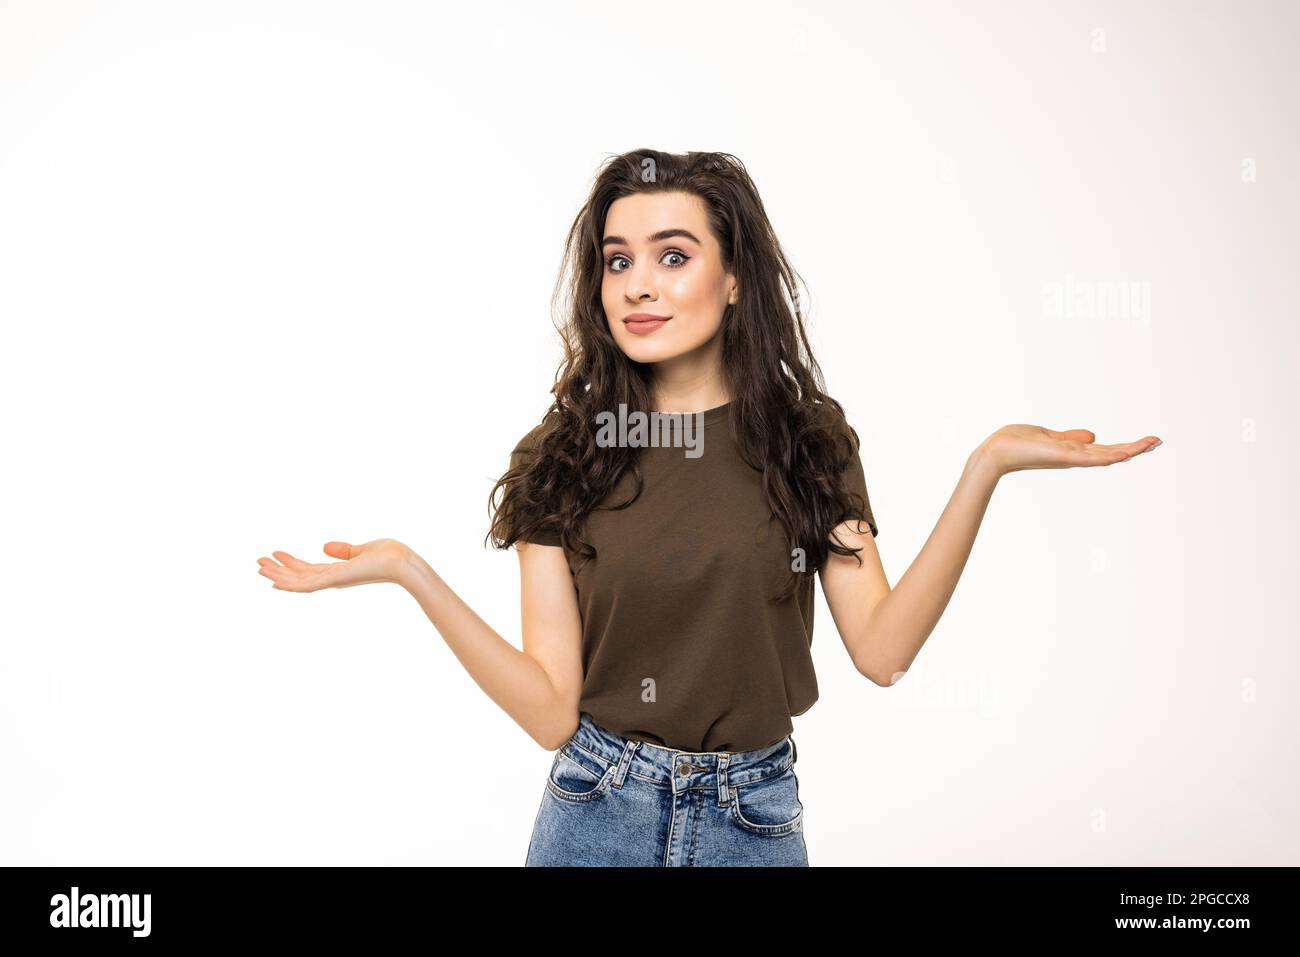 Beautiful woman making a scale with her arms wide open, isolated in a white background Stock Photo